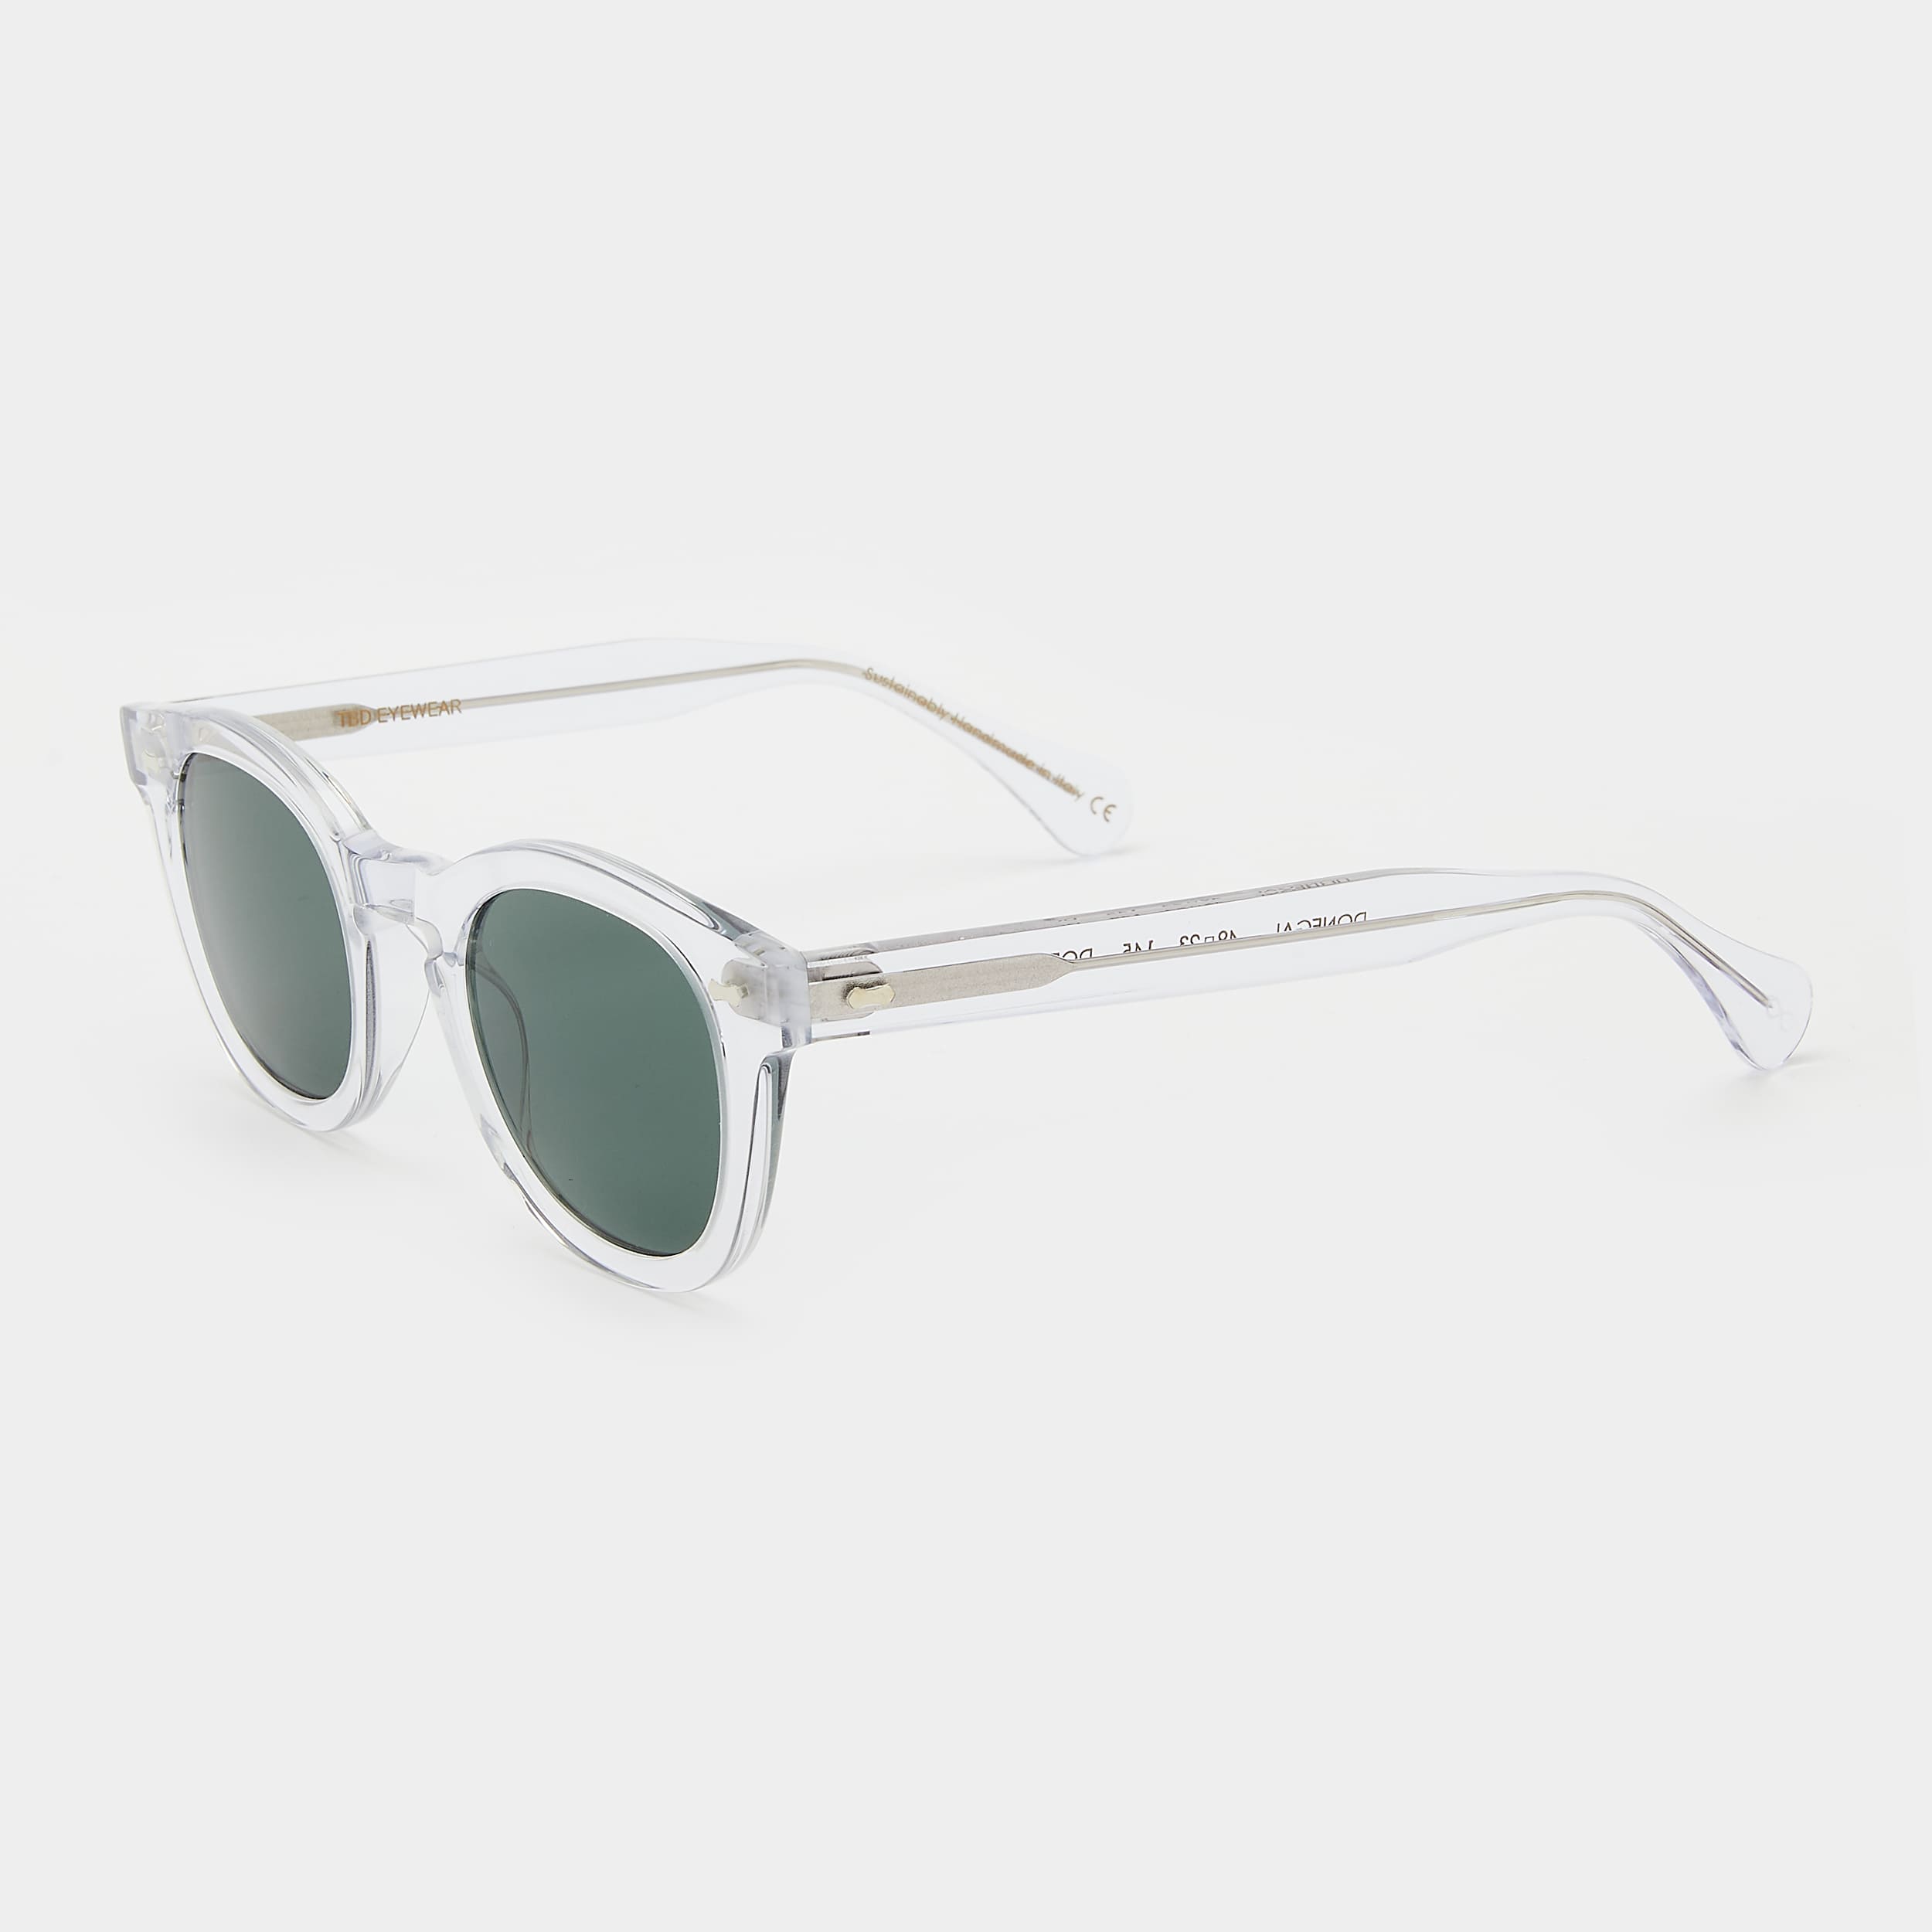 sunglasses-donegal-eco-transparent-bottle-green-sustainable-tbd-eyewear-total